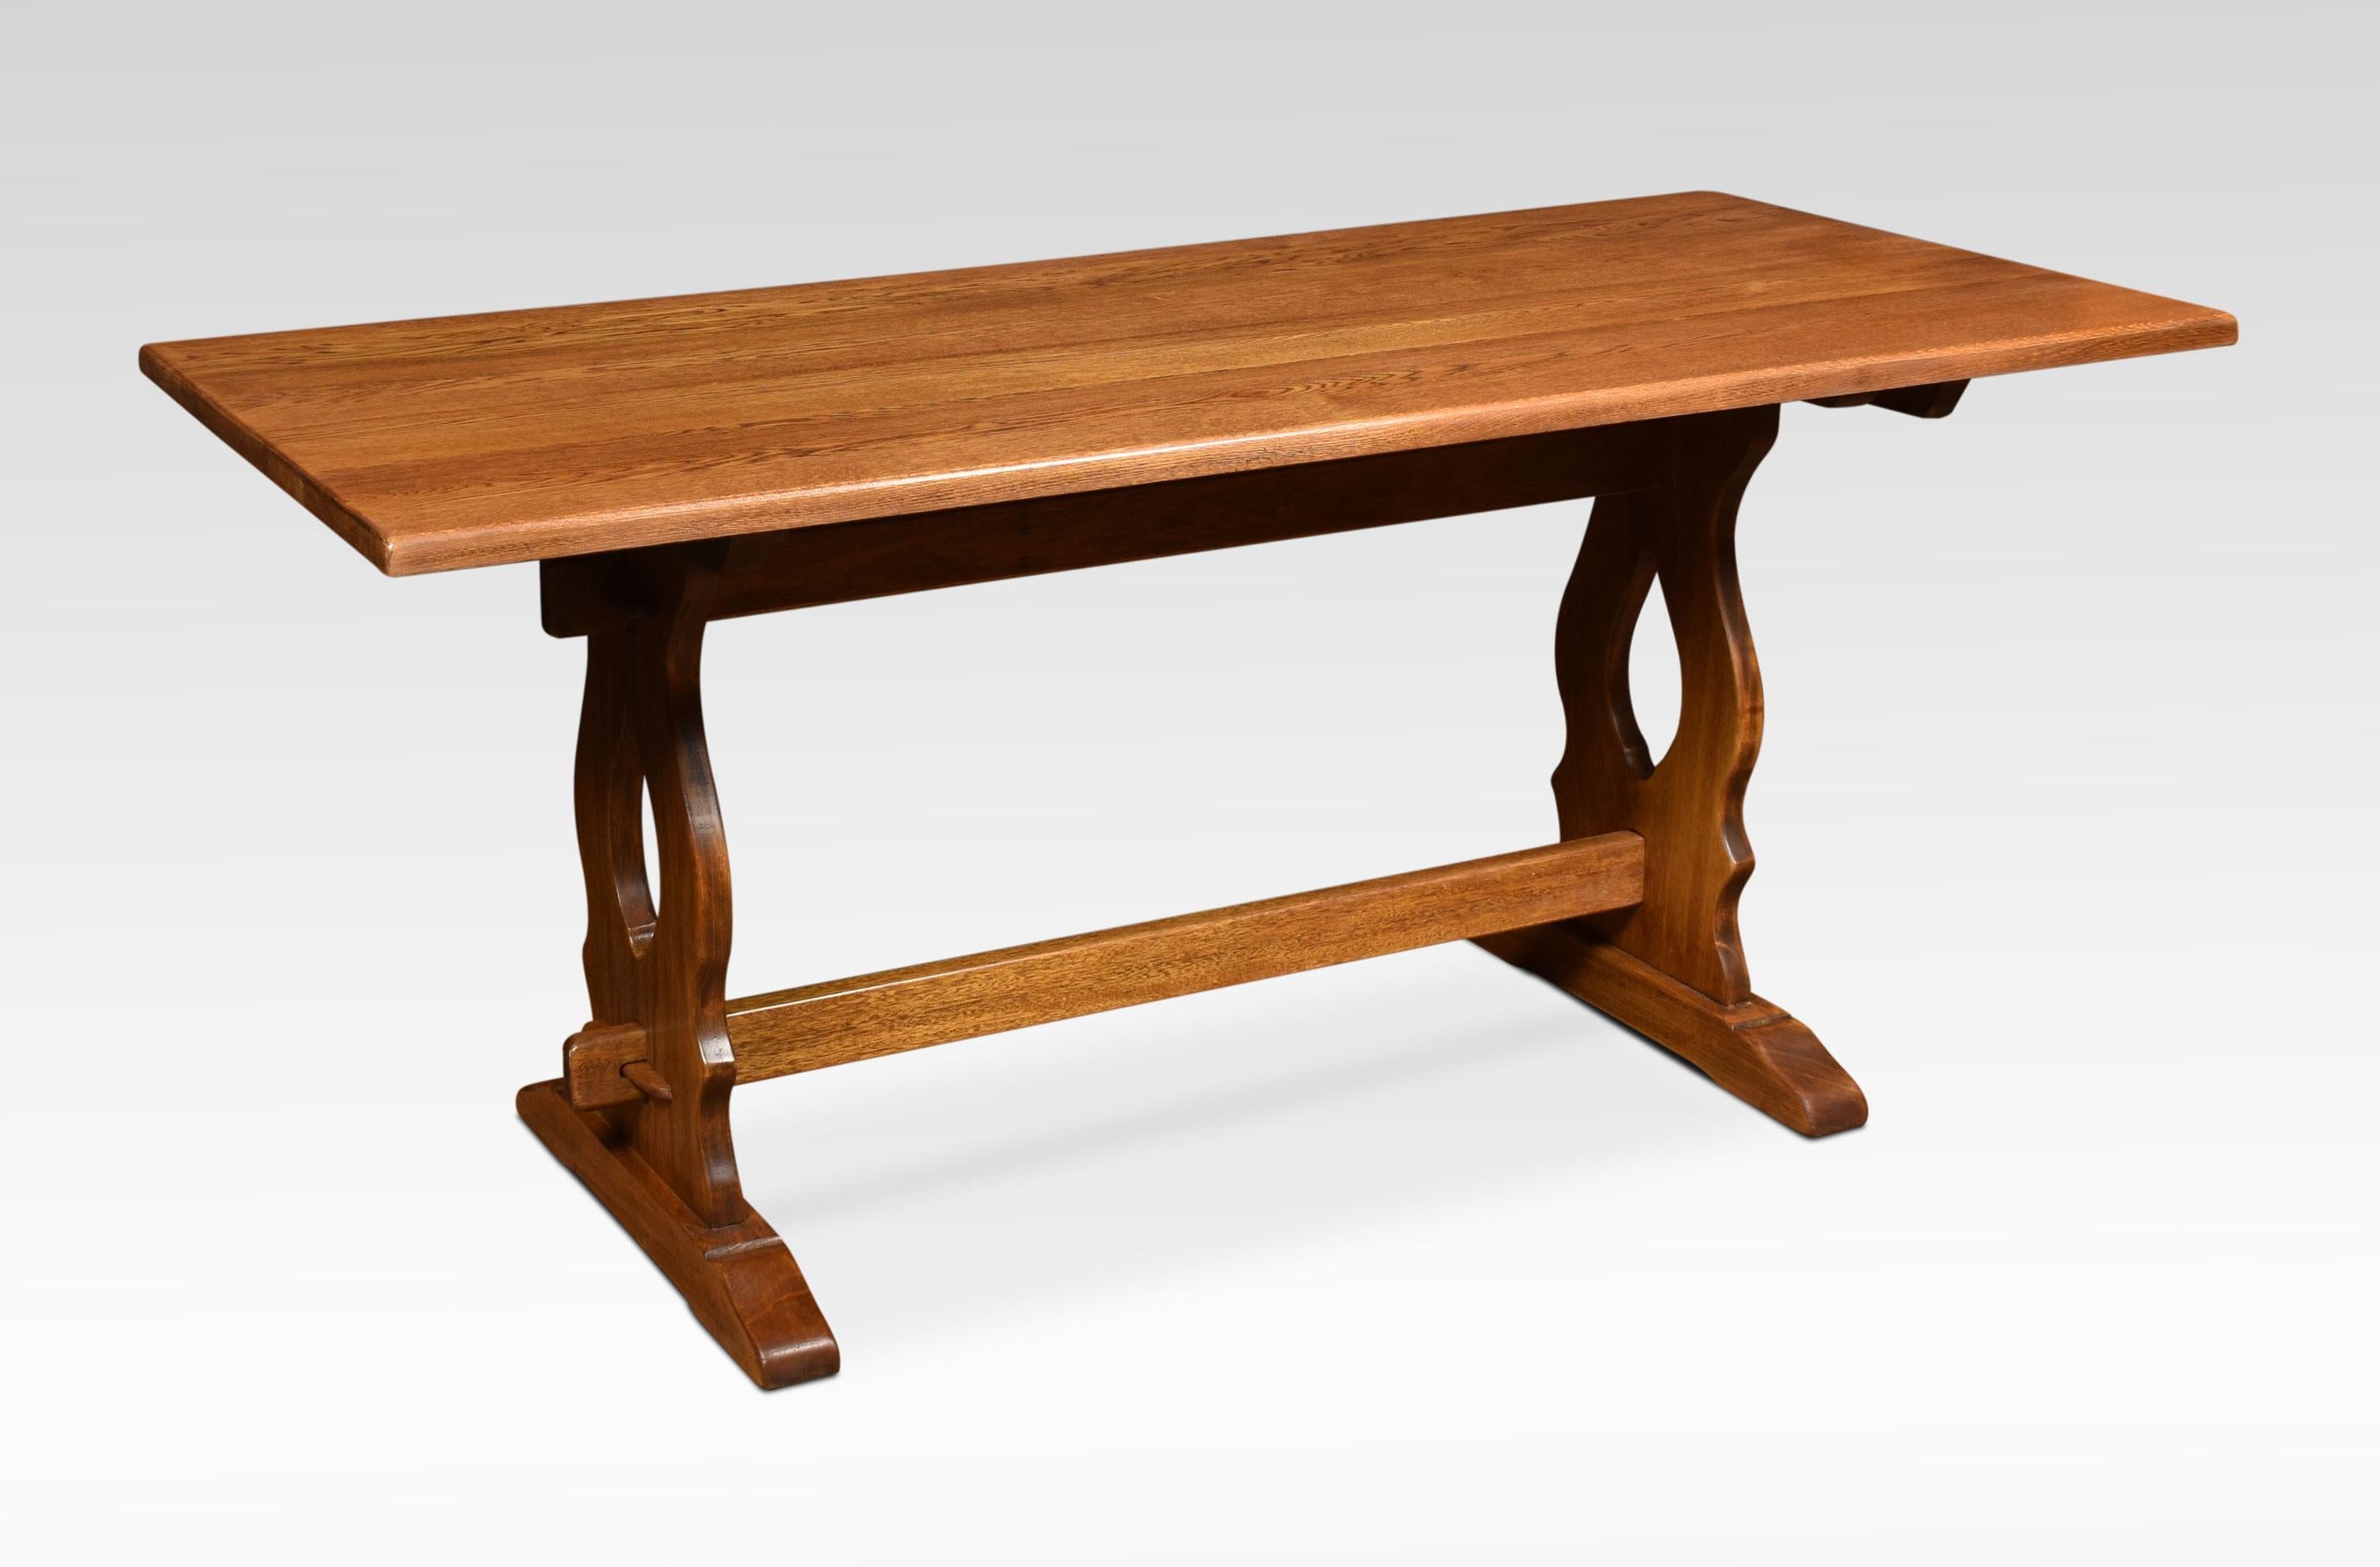 Large oak refectory table, the plank top, raised on trestle ends united by stretcher.
Dimensions:
Height 30 inches
Width 66 inches
Depth 30 inches.